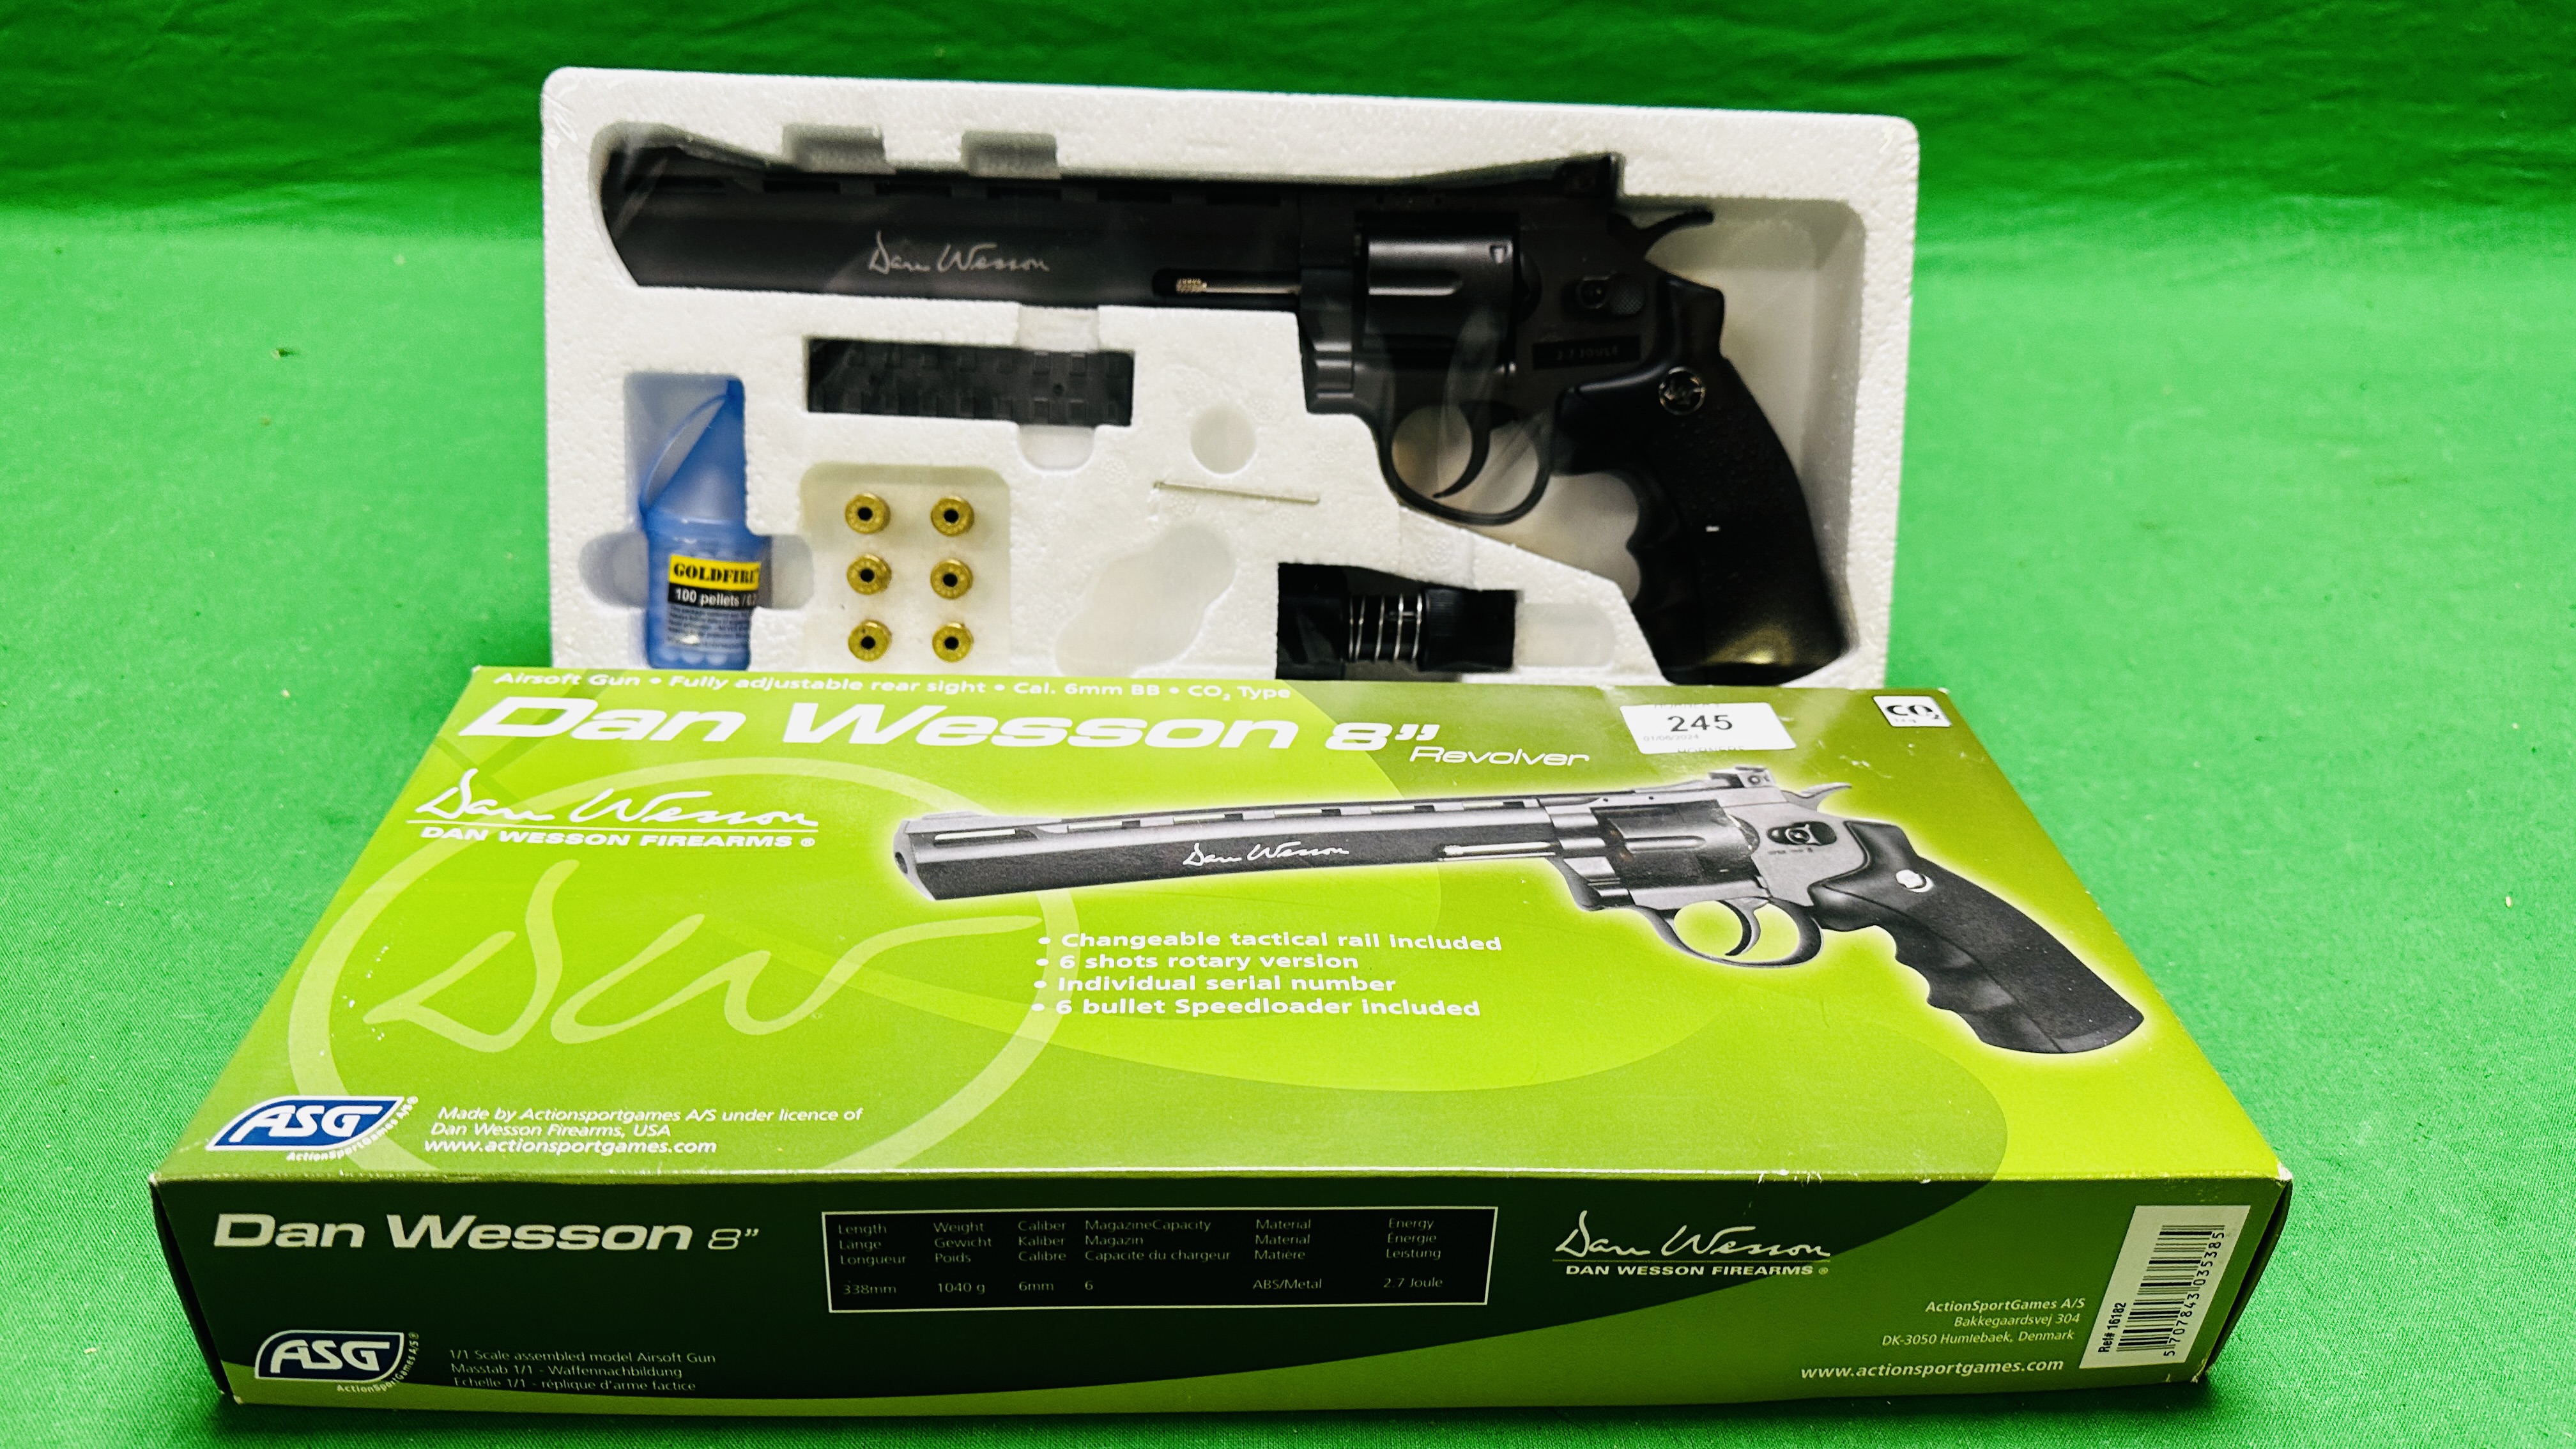 ASG DAN WESSON 8" Co2 6MM BB AIR GUN 6 SHOT REVOLVER - (ALL GUNS TO BE INSPECTED AND SERVICED BY